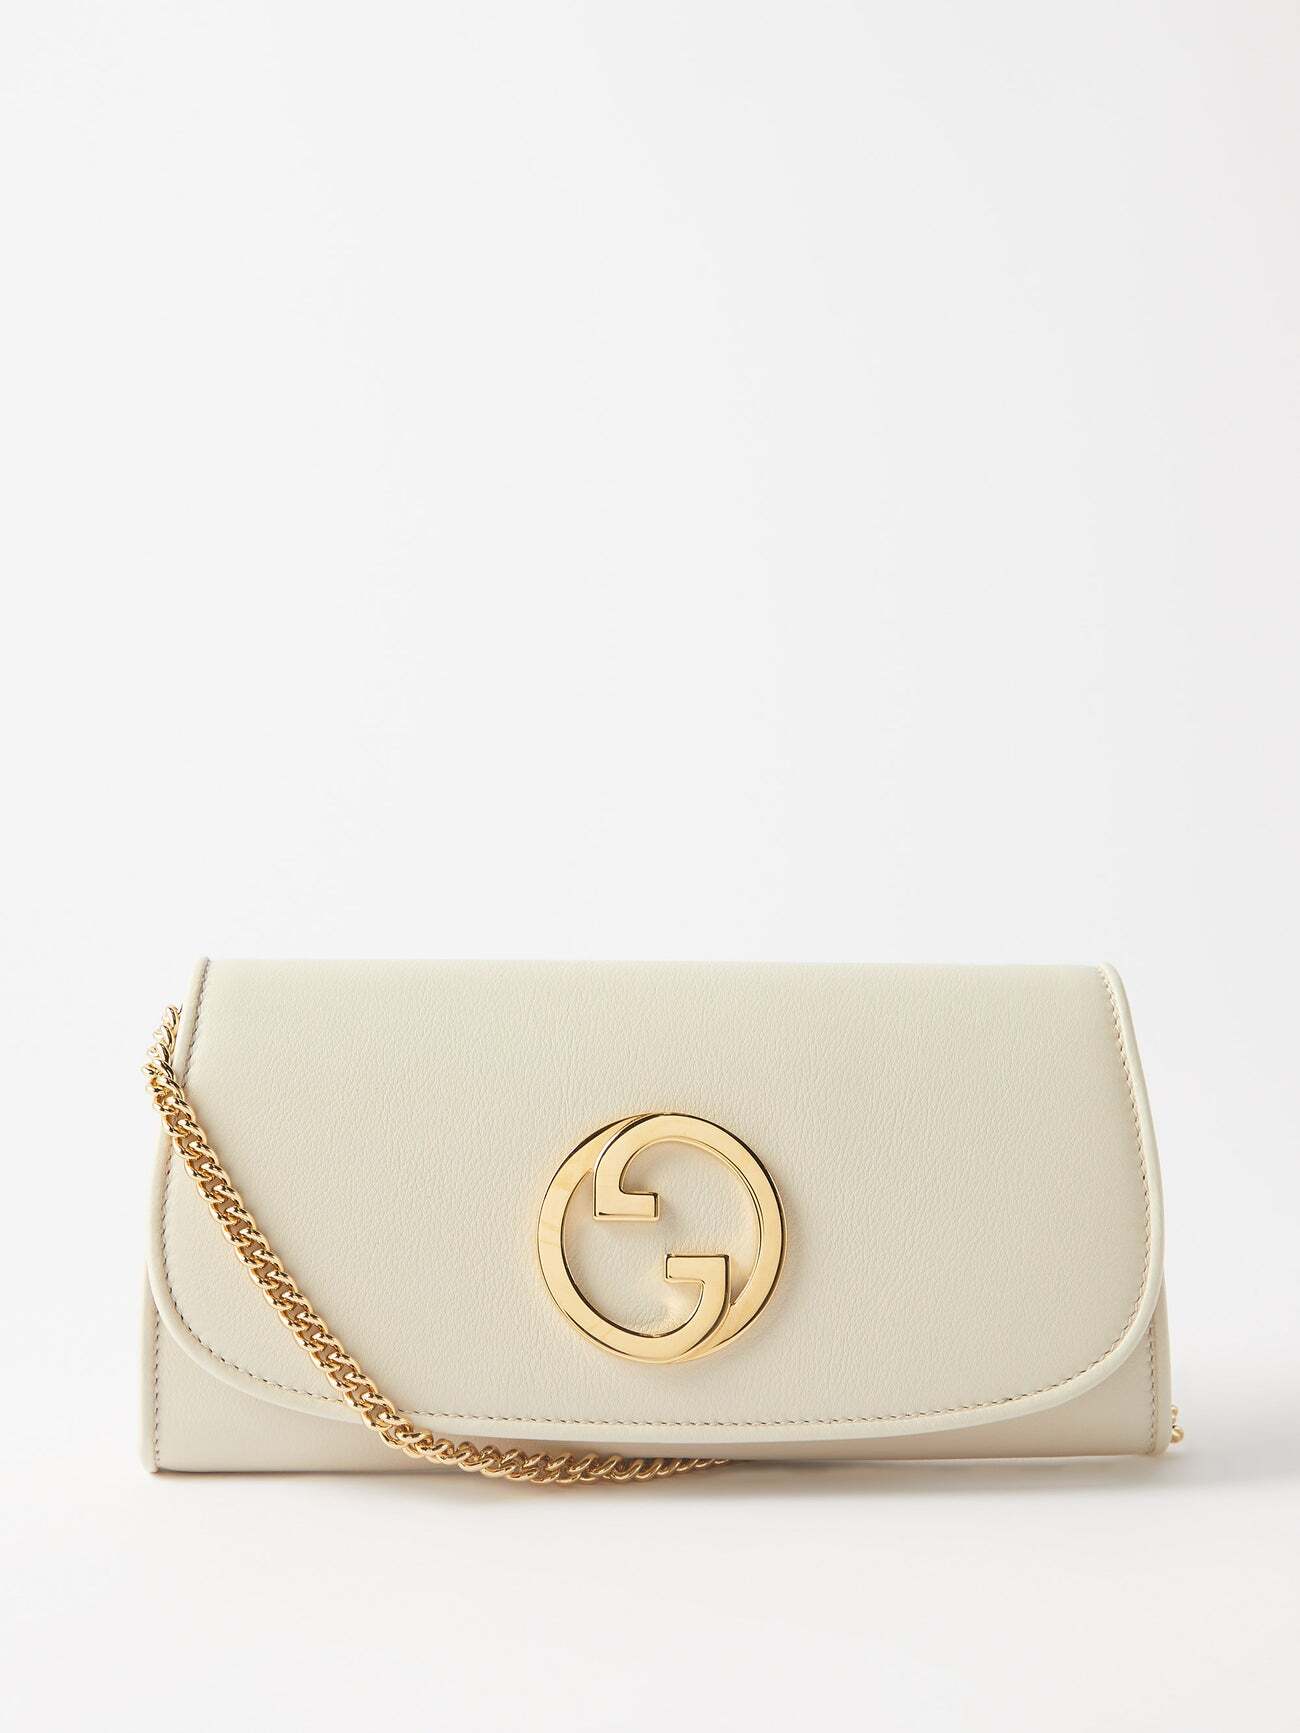 Gucci - Blondie Chain-strap Leather Cross-body Bag - Womens - White